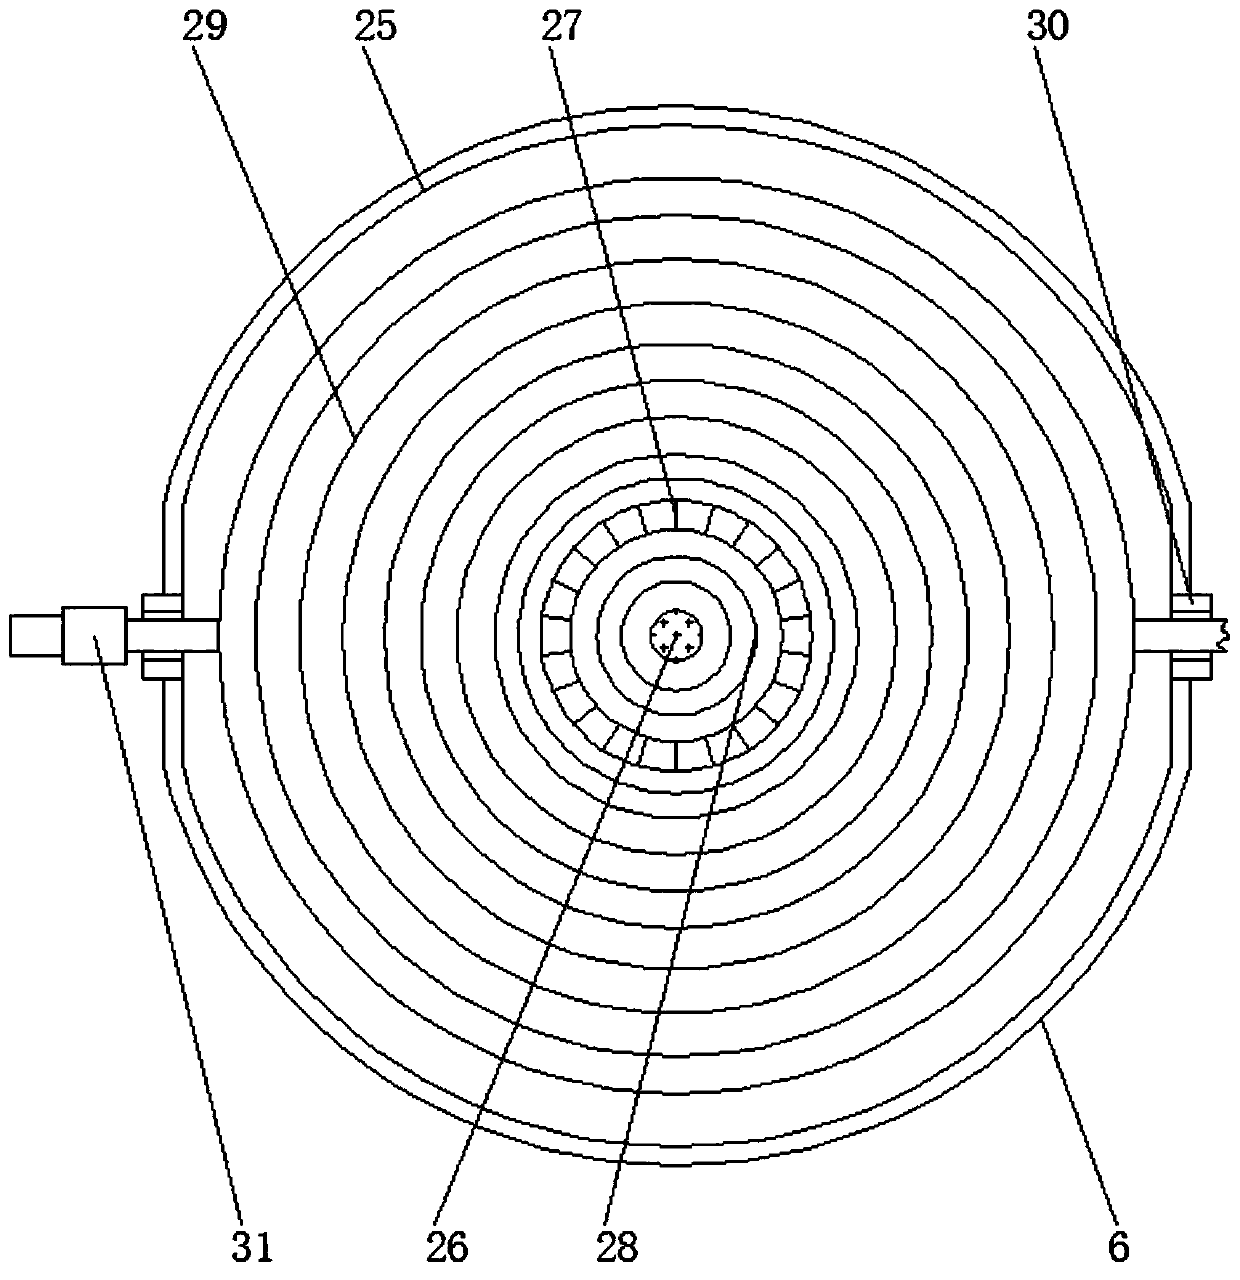 Rotary learning display device